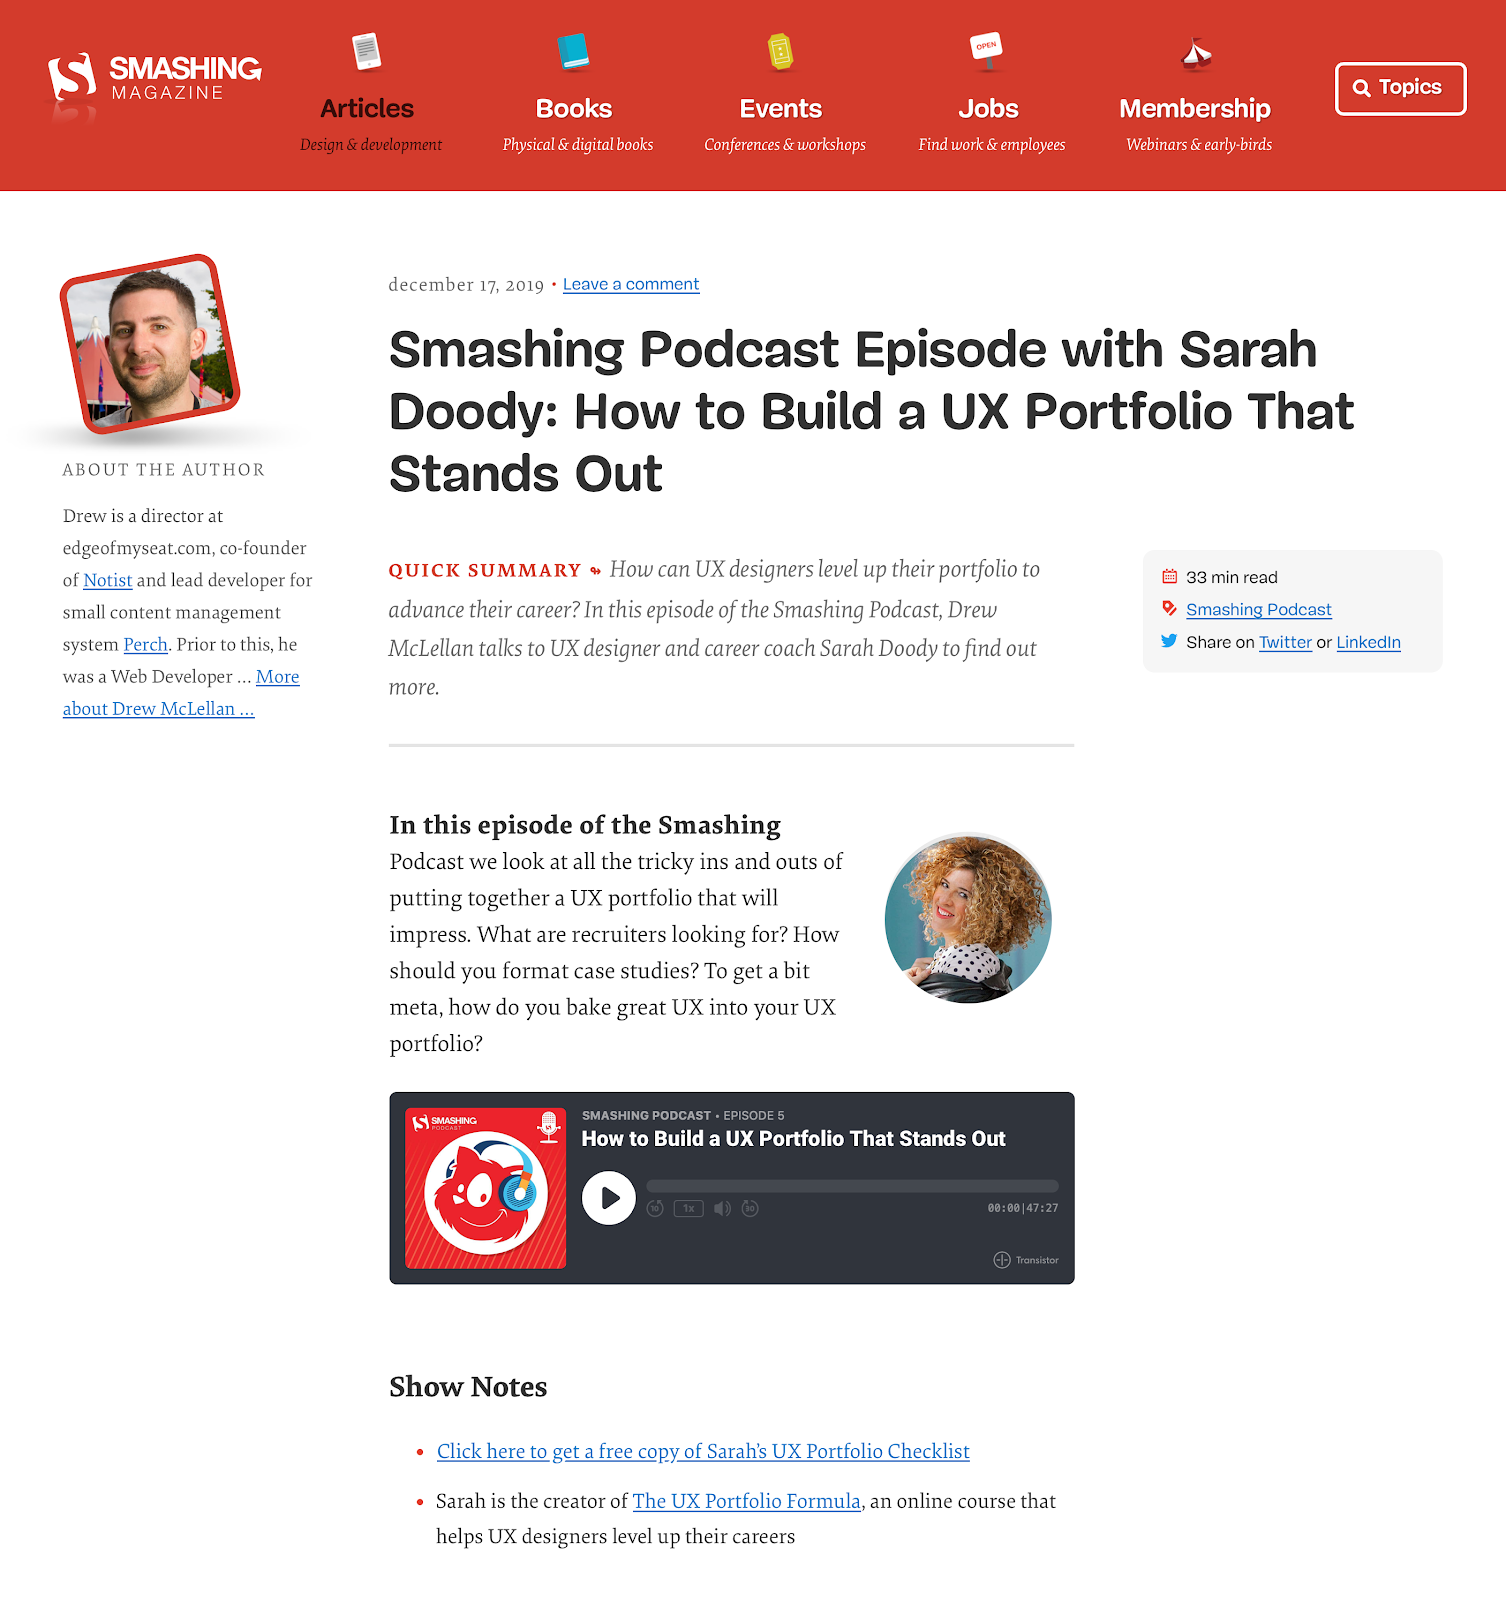 Smashing Podcast Episode with Sarah Doody: How to Build a UX Portfolio That Stands Out